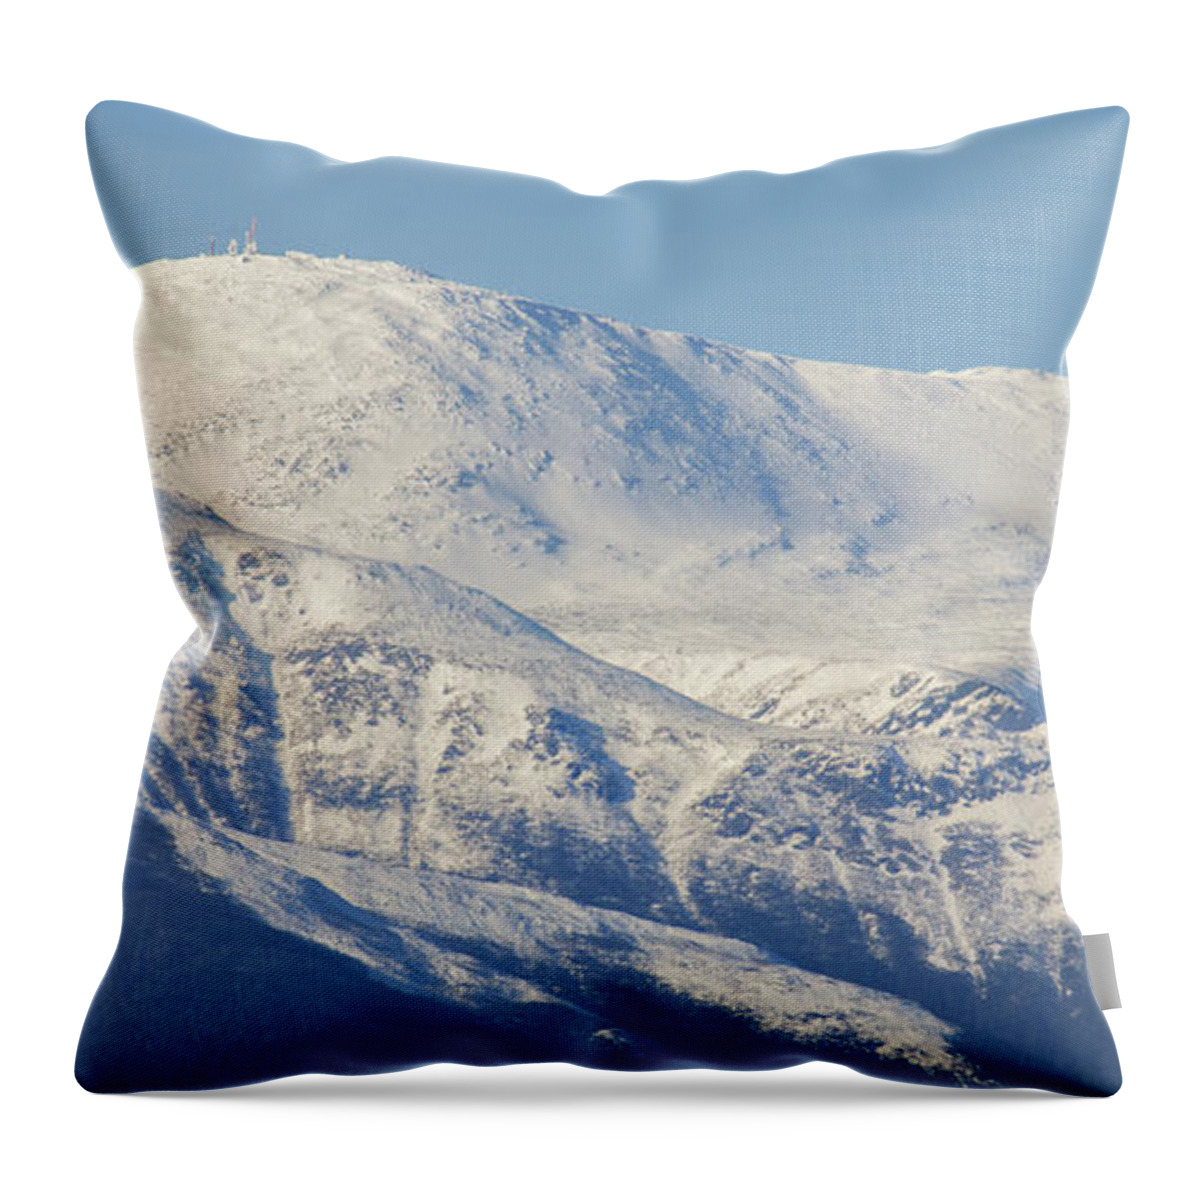 Snowy Throw Pillow featuring the photograph Snowy Mount Washington by White Mountain Images